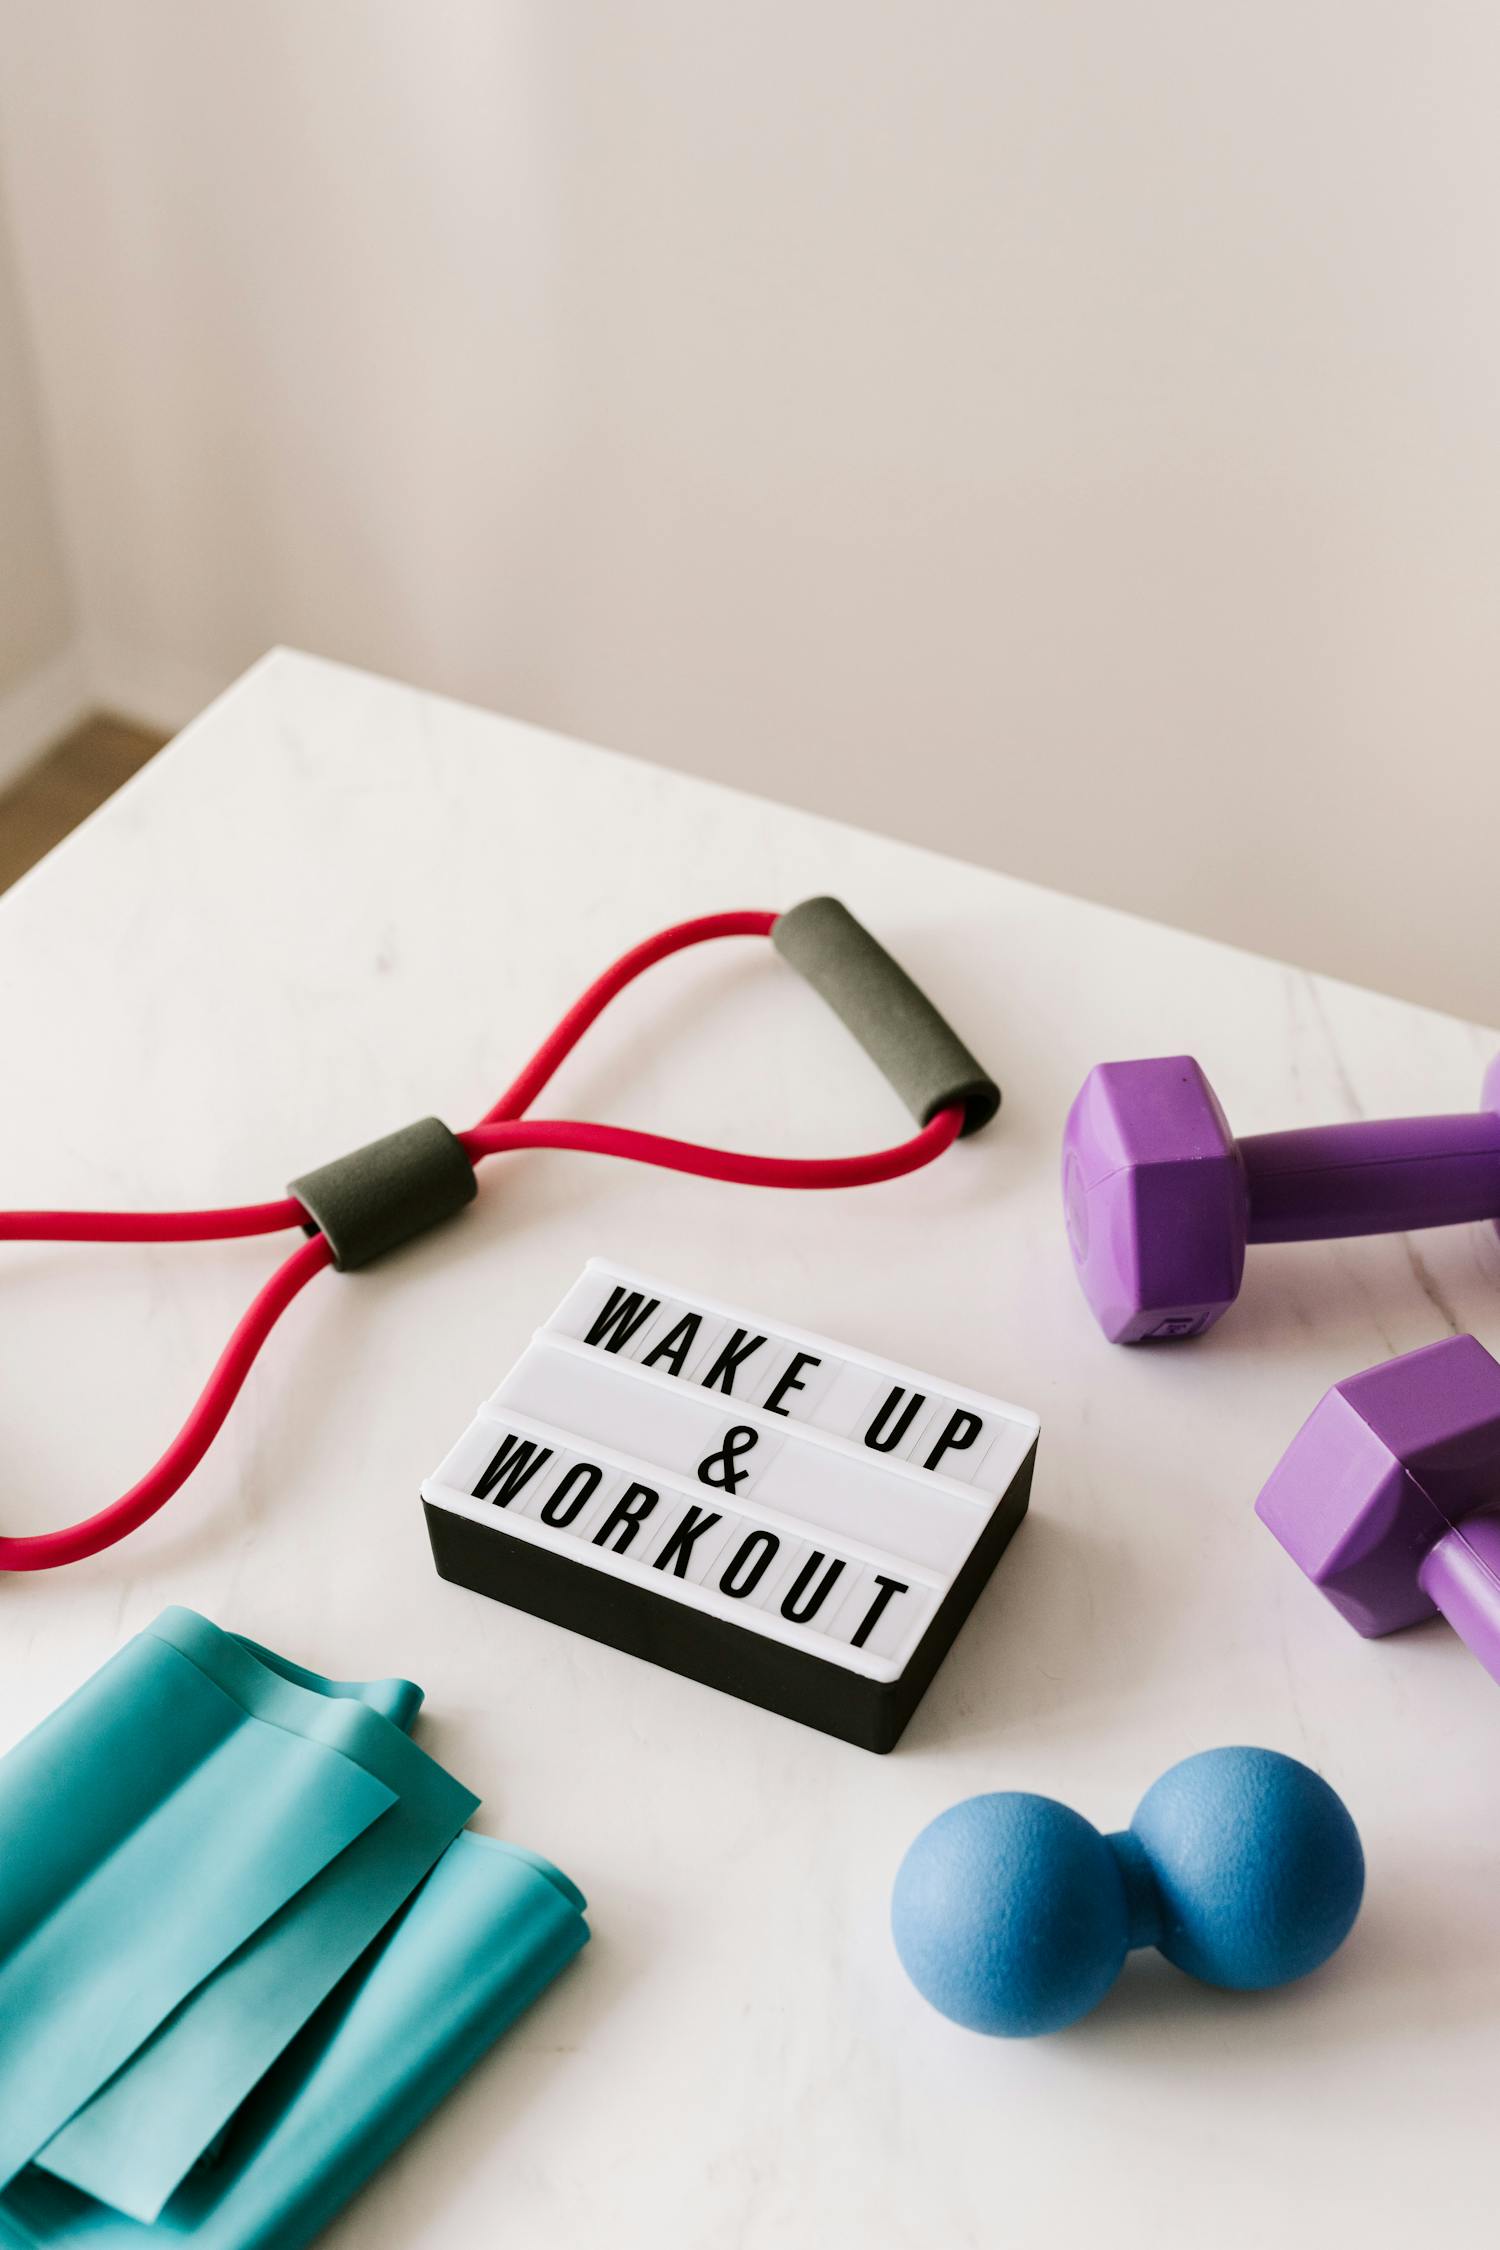 From above composition of dumbbells and massage double ball and tape and tubular expanders surrounding light box with wake up and workout words placed on white surface of table